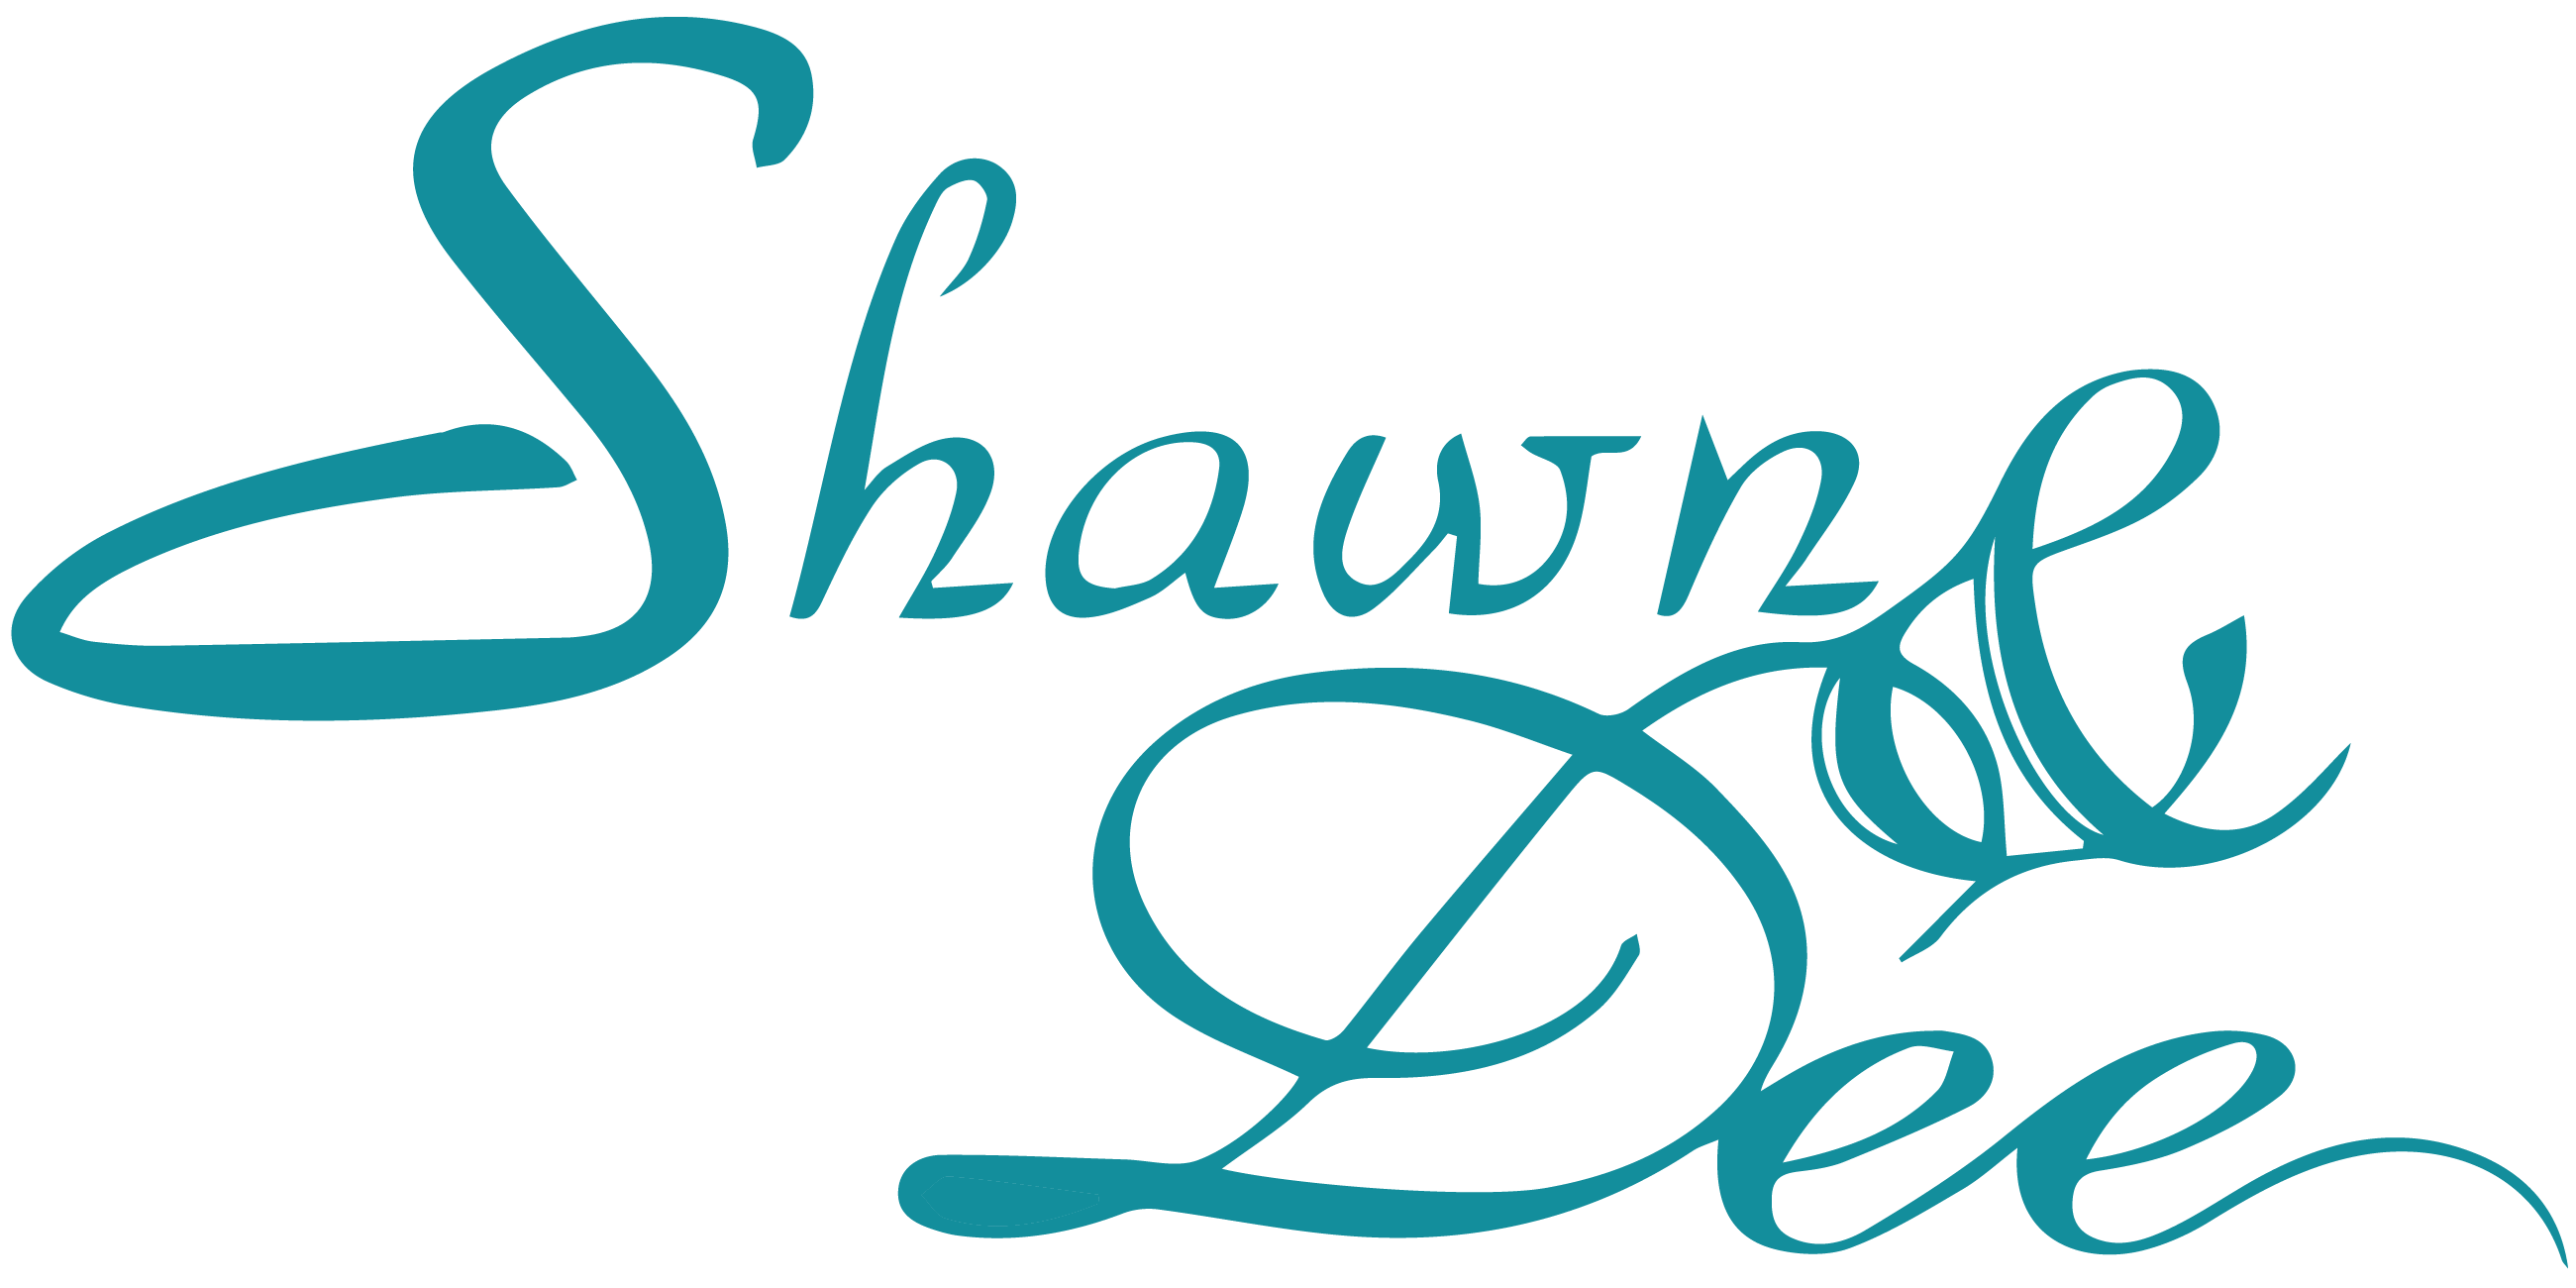 Meet Shawn and Dee McDonough - Spark My Site